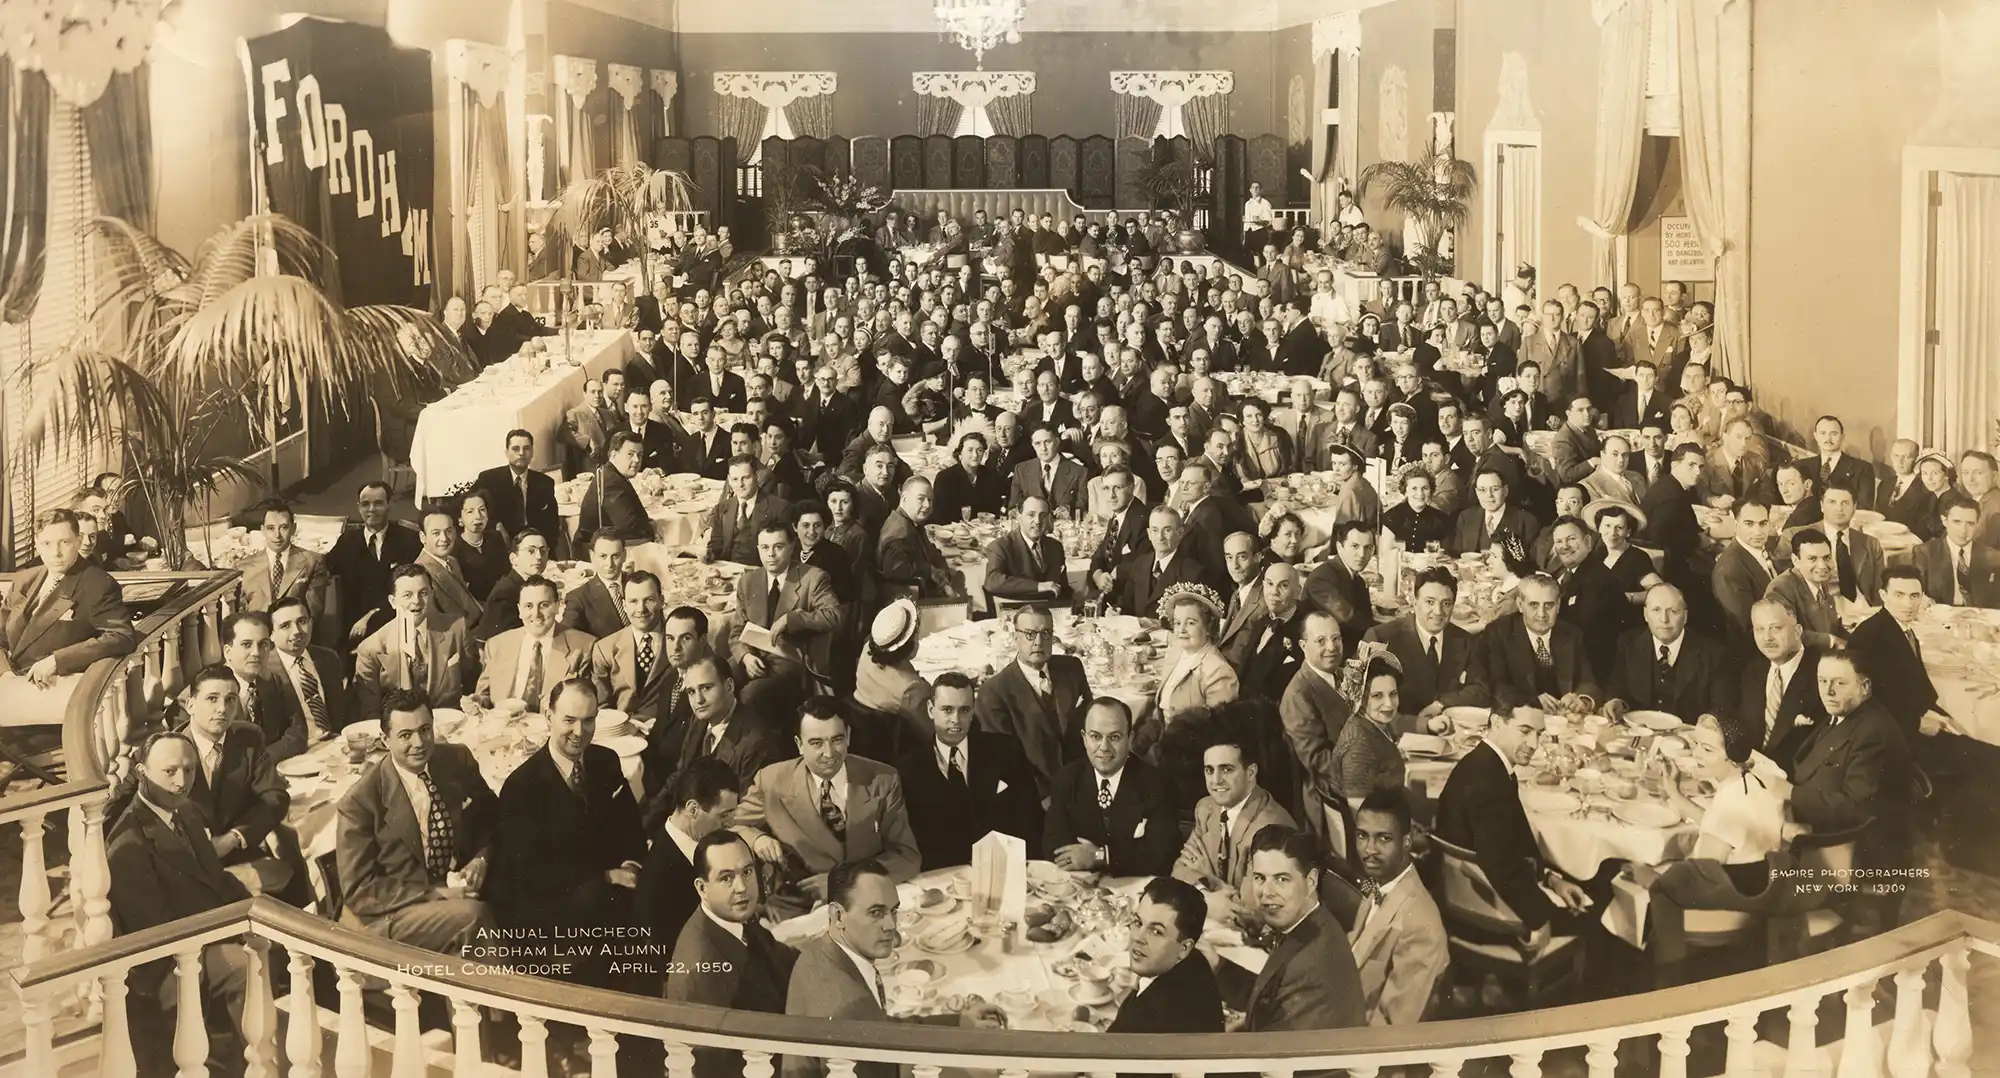 a sepia toned picture of the Fordham Law Alumni Association at their Fordham Law Annual Luncheon in 1950